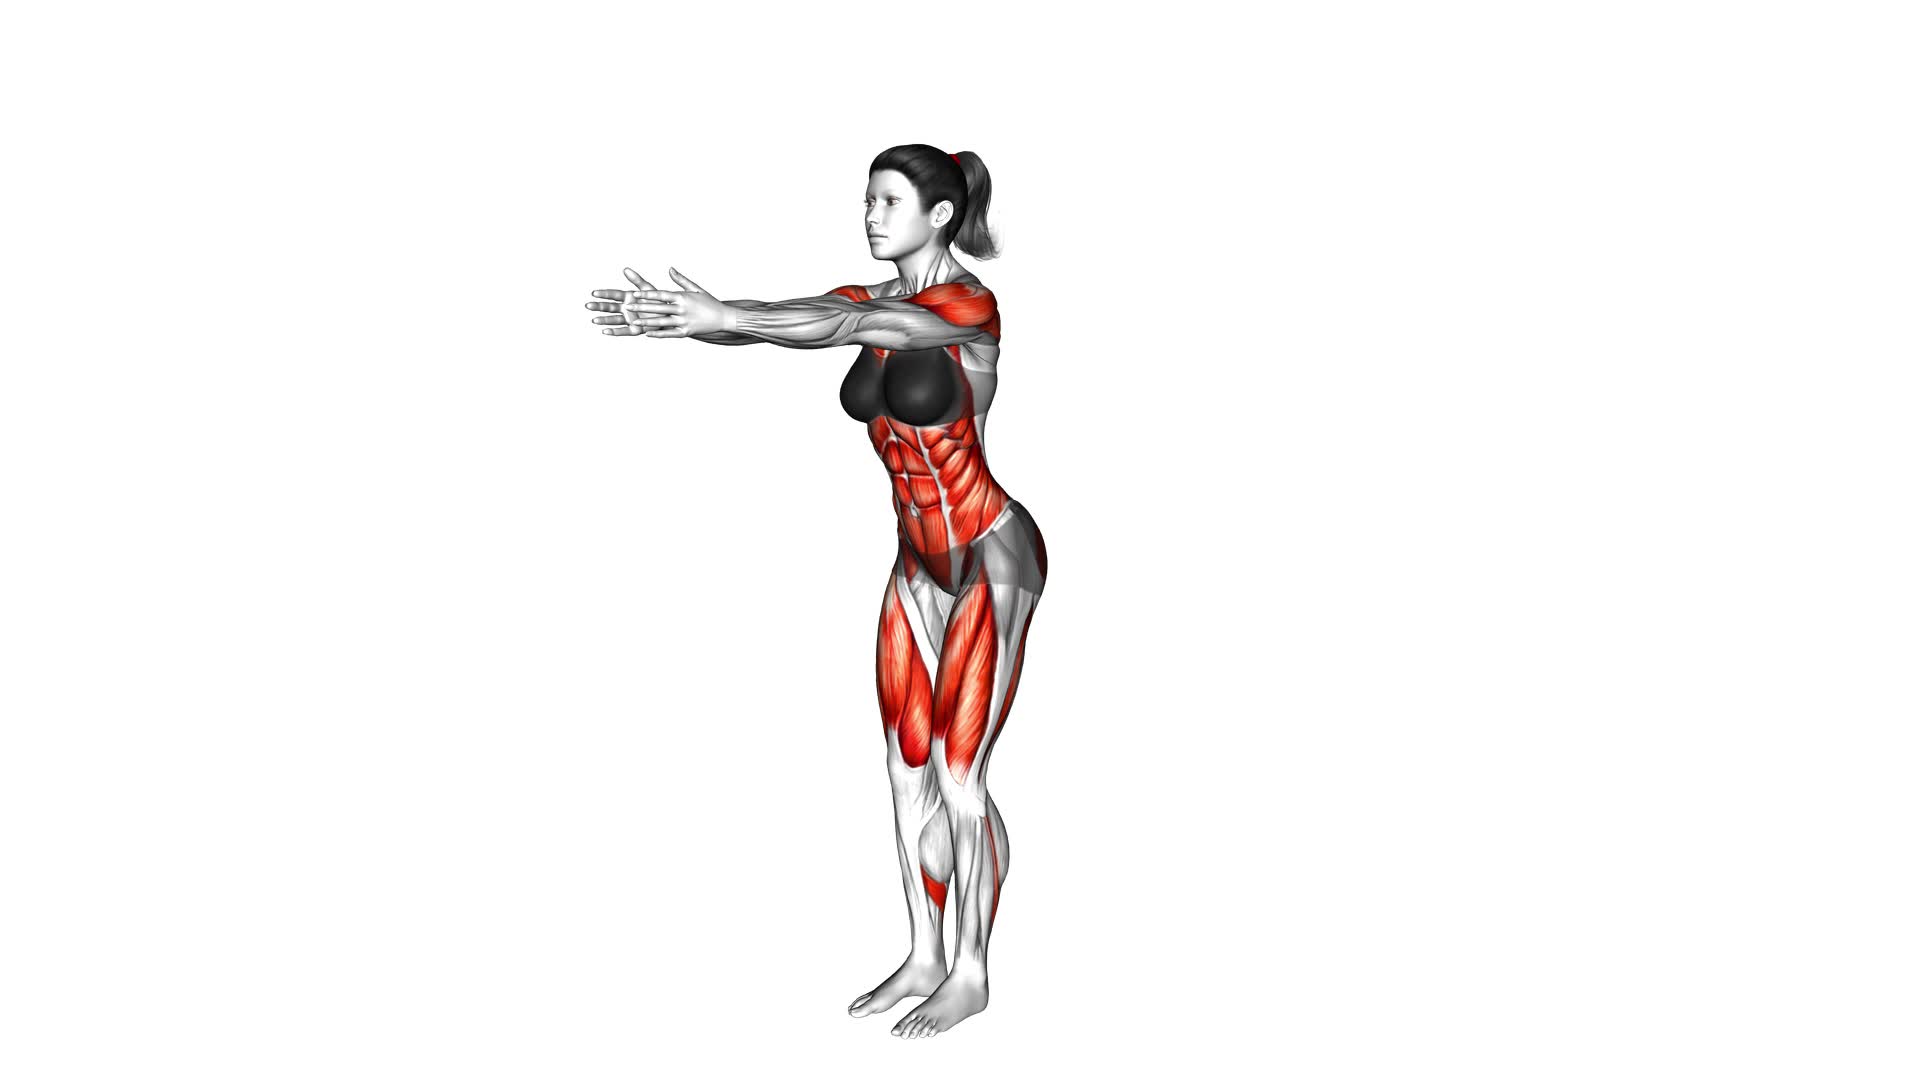 Archer Stepback (female) - Video Exercise Guide & Tips